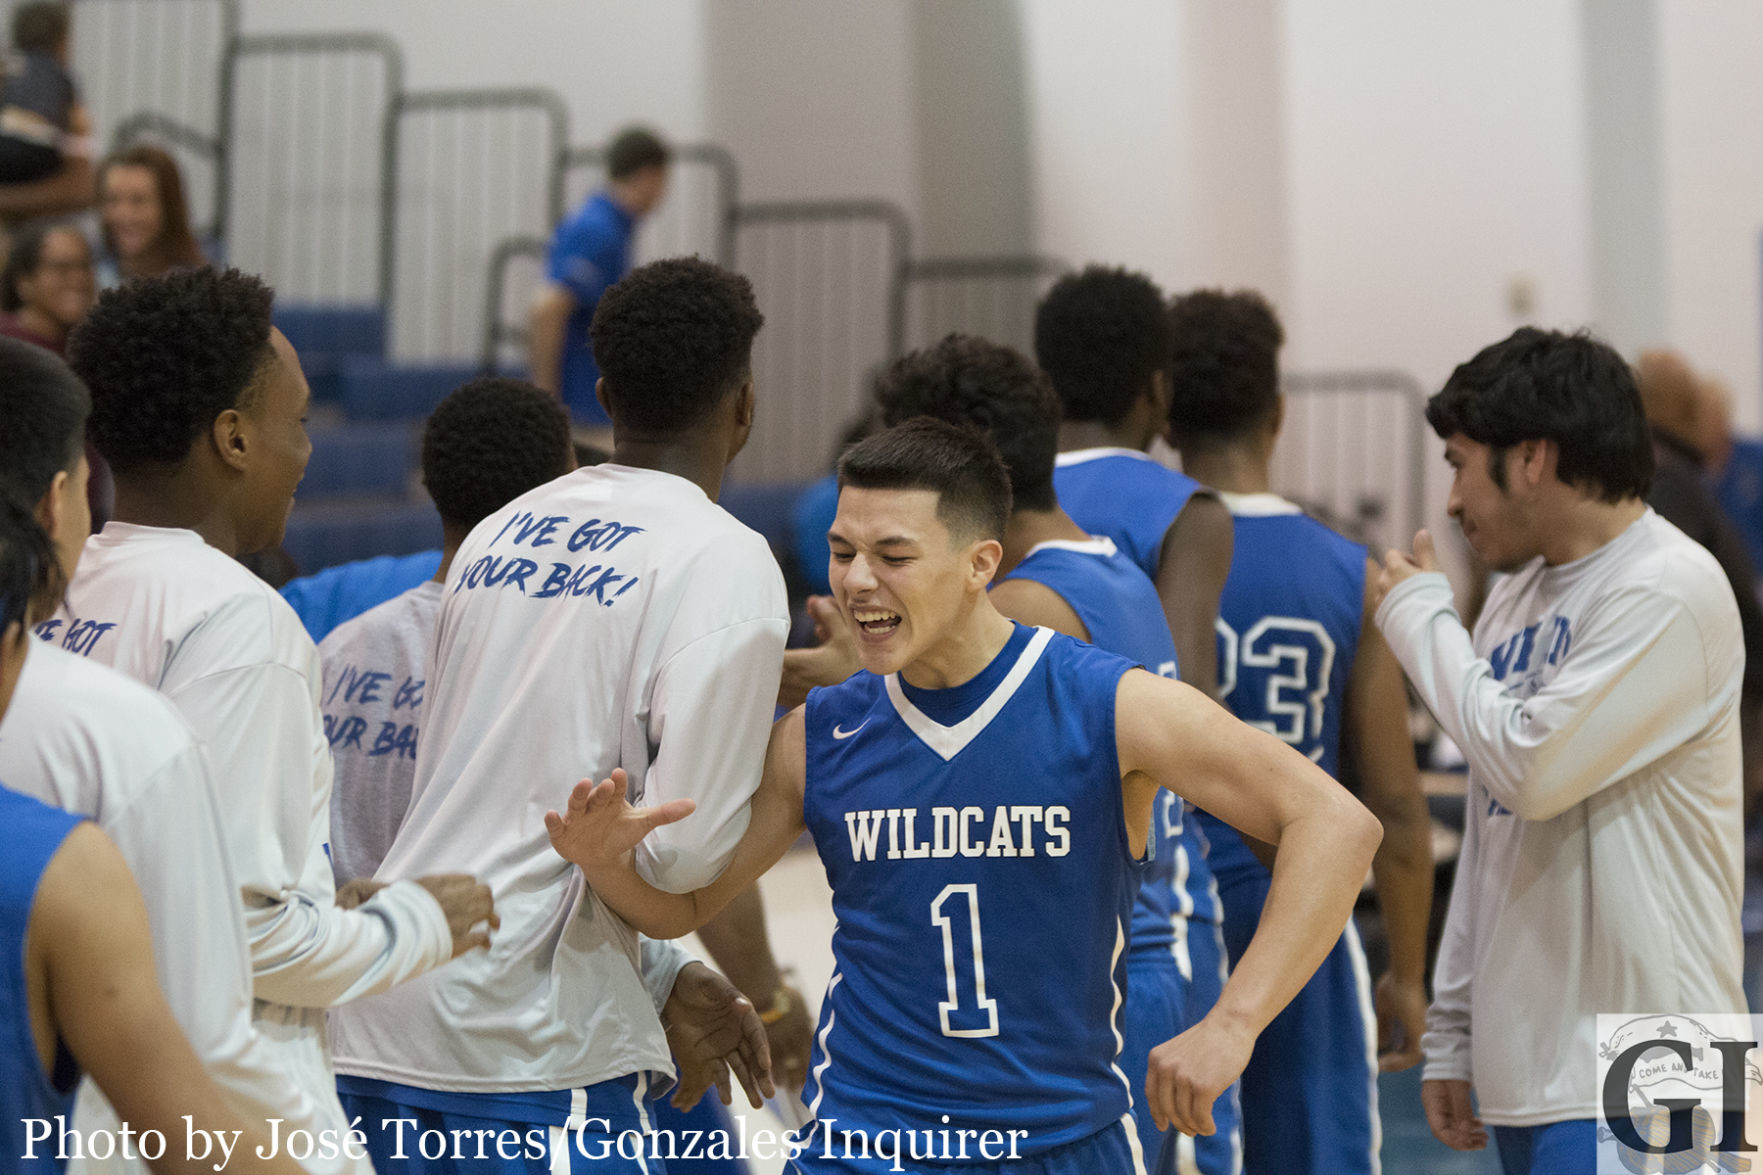 Justin Schilhab (1) celebrates with his team after a 78-71 win over #2 Leggett. Schilhab forced overtime with a three pointer with six seconds left in regulation.